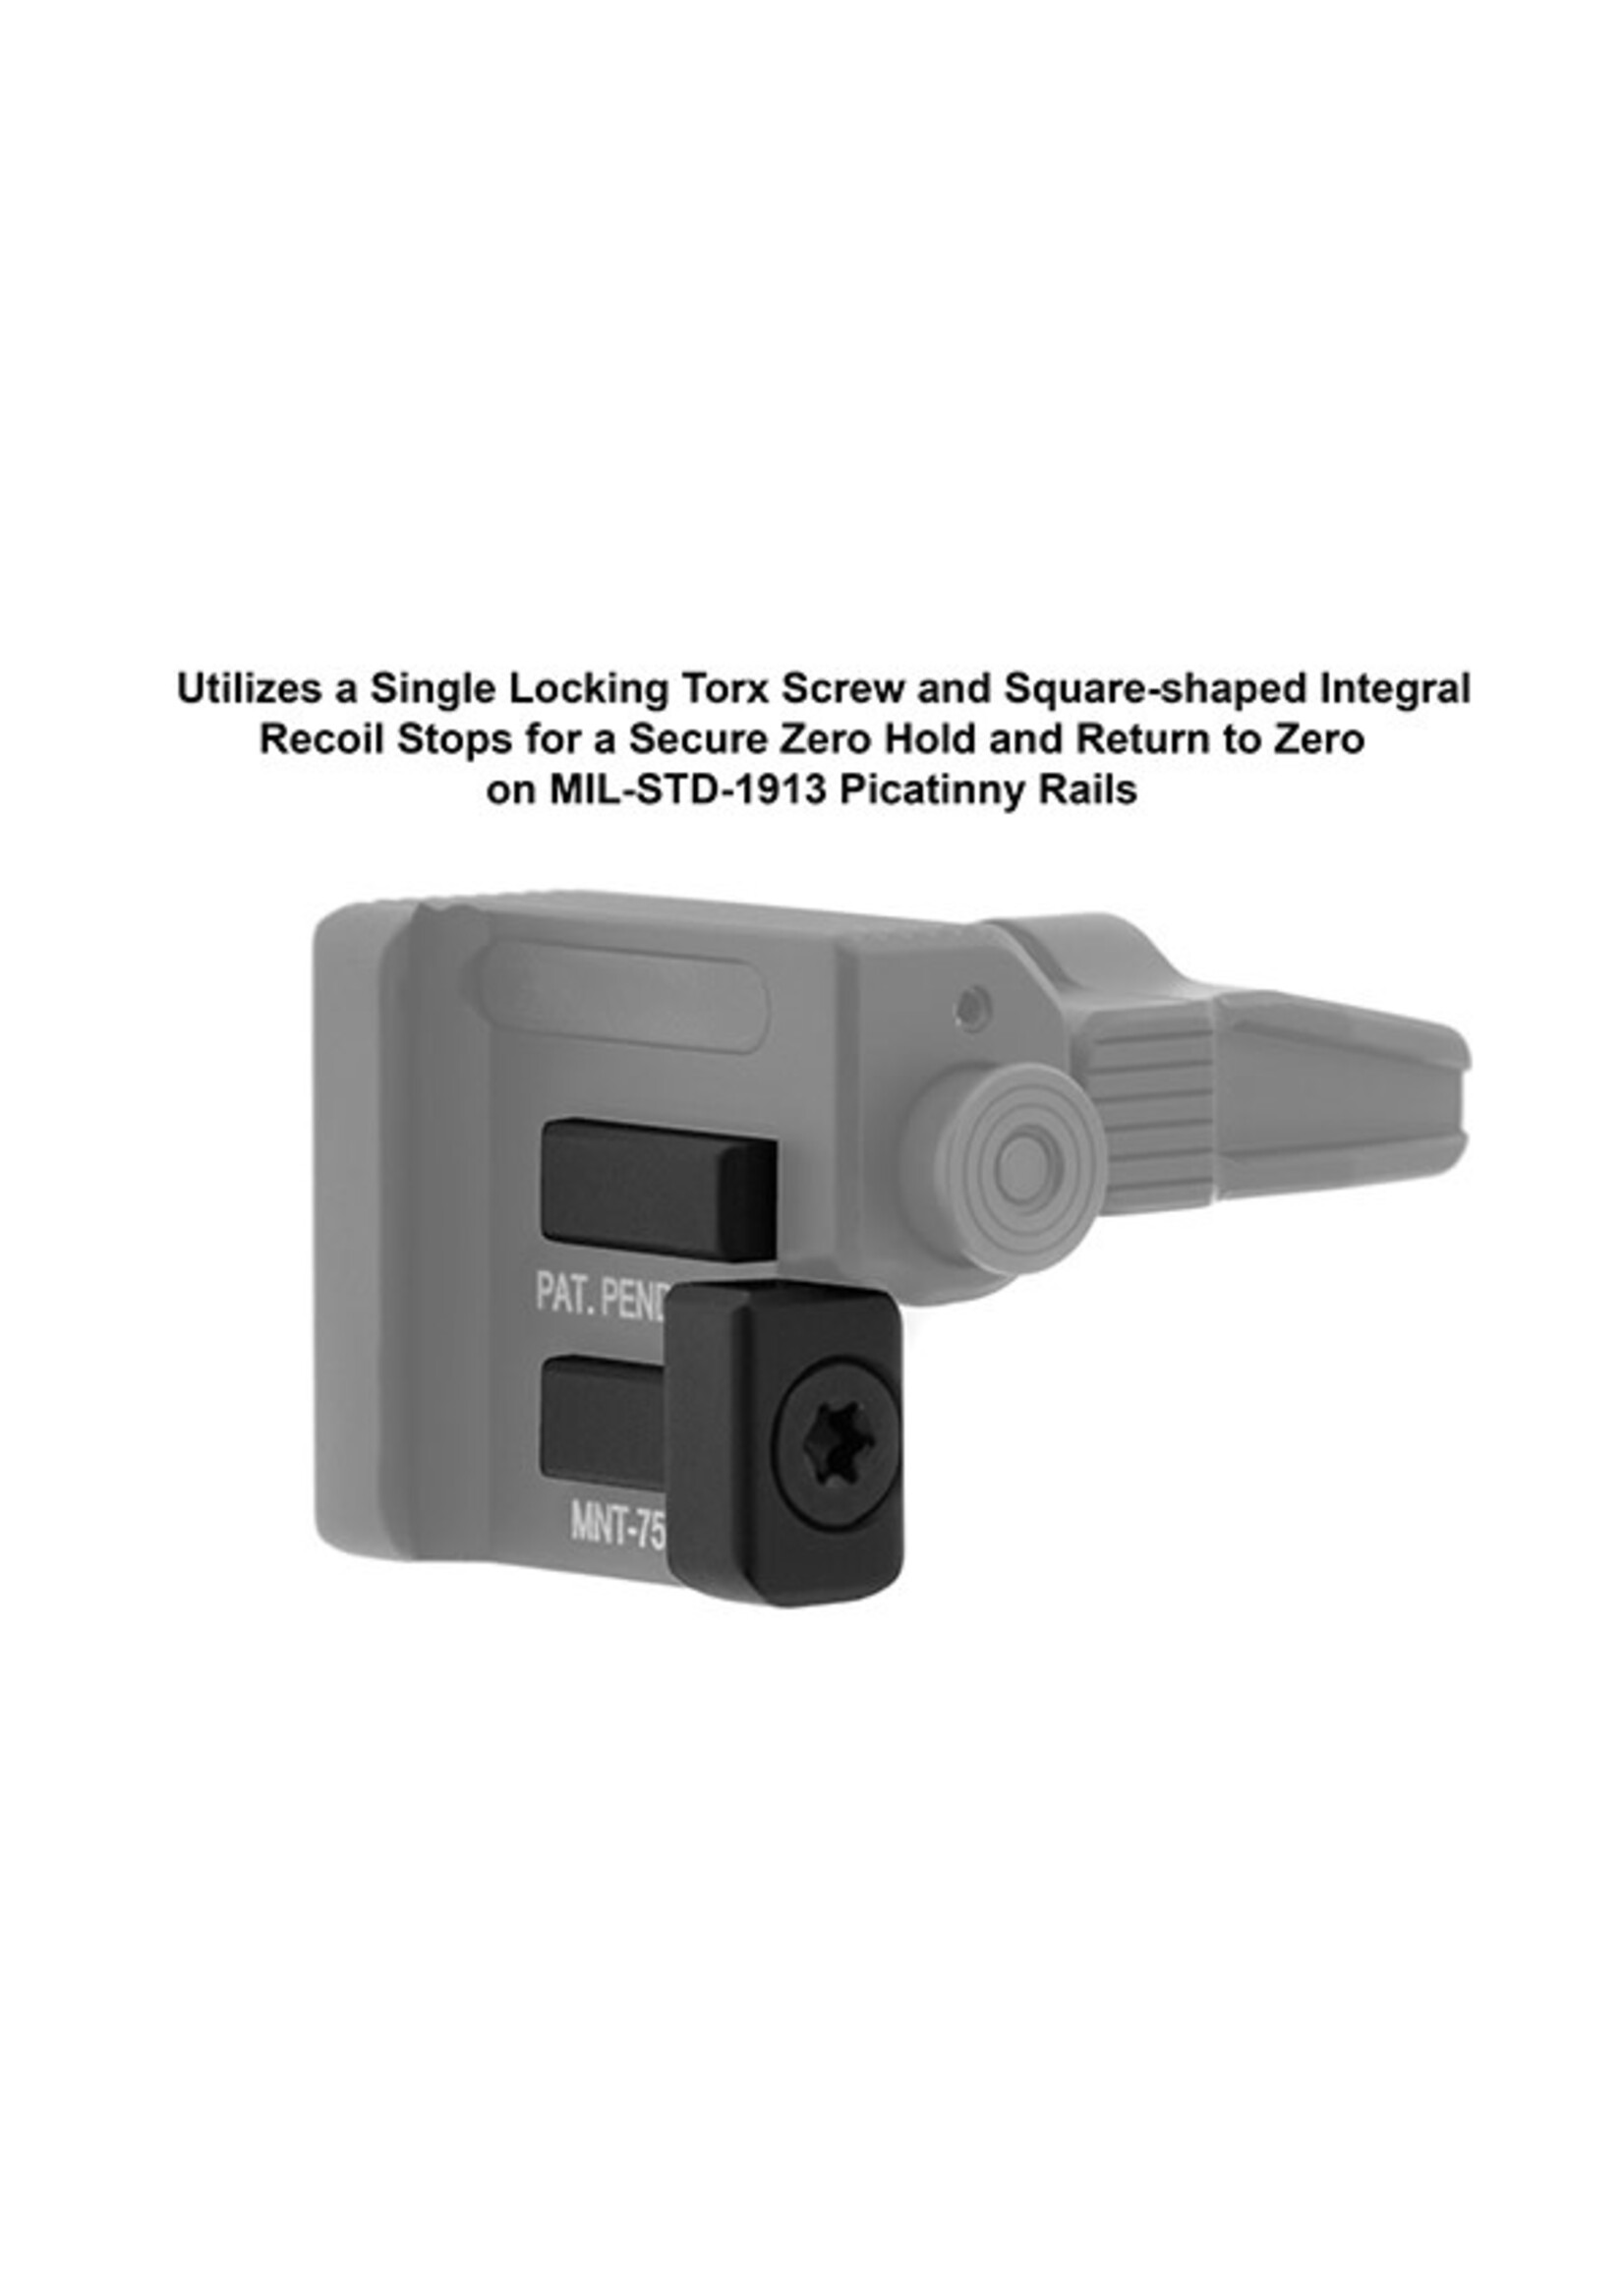 UTG ACCU-SYNC SPRING-LOADED FLIP-UP FRONT SIGHT